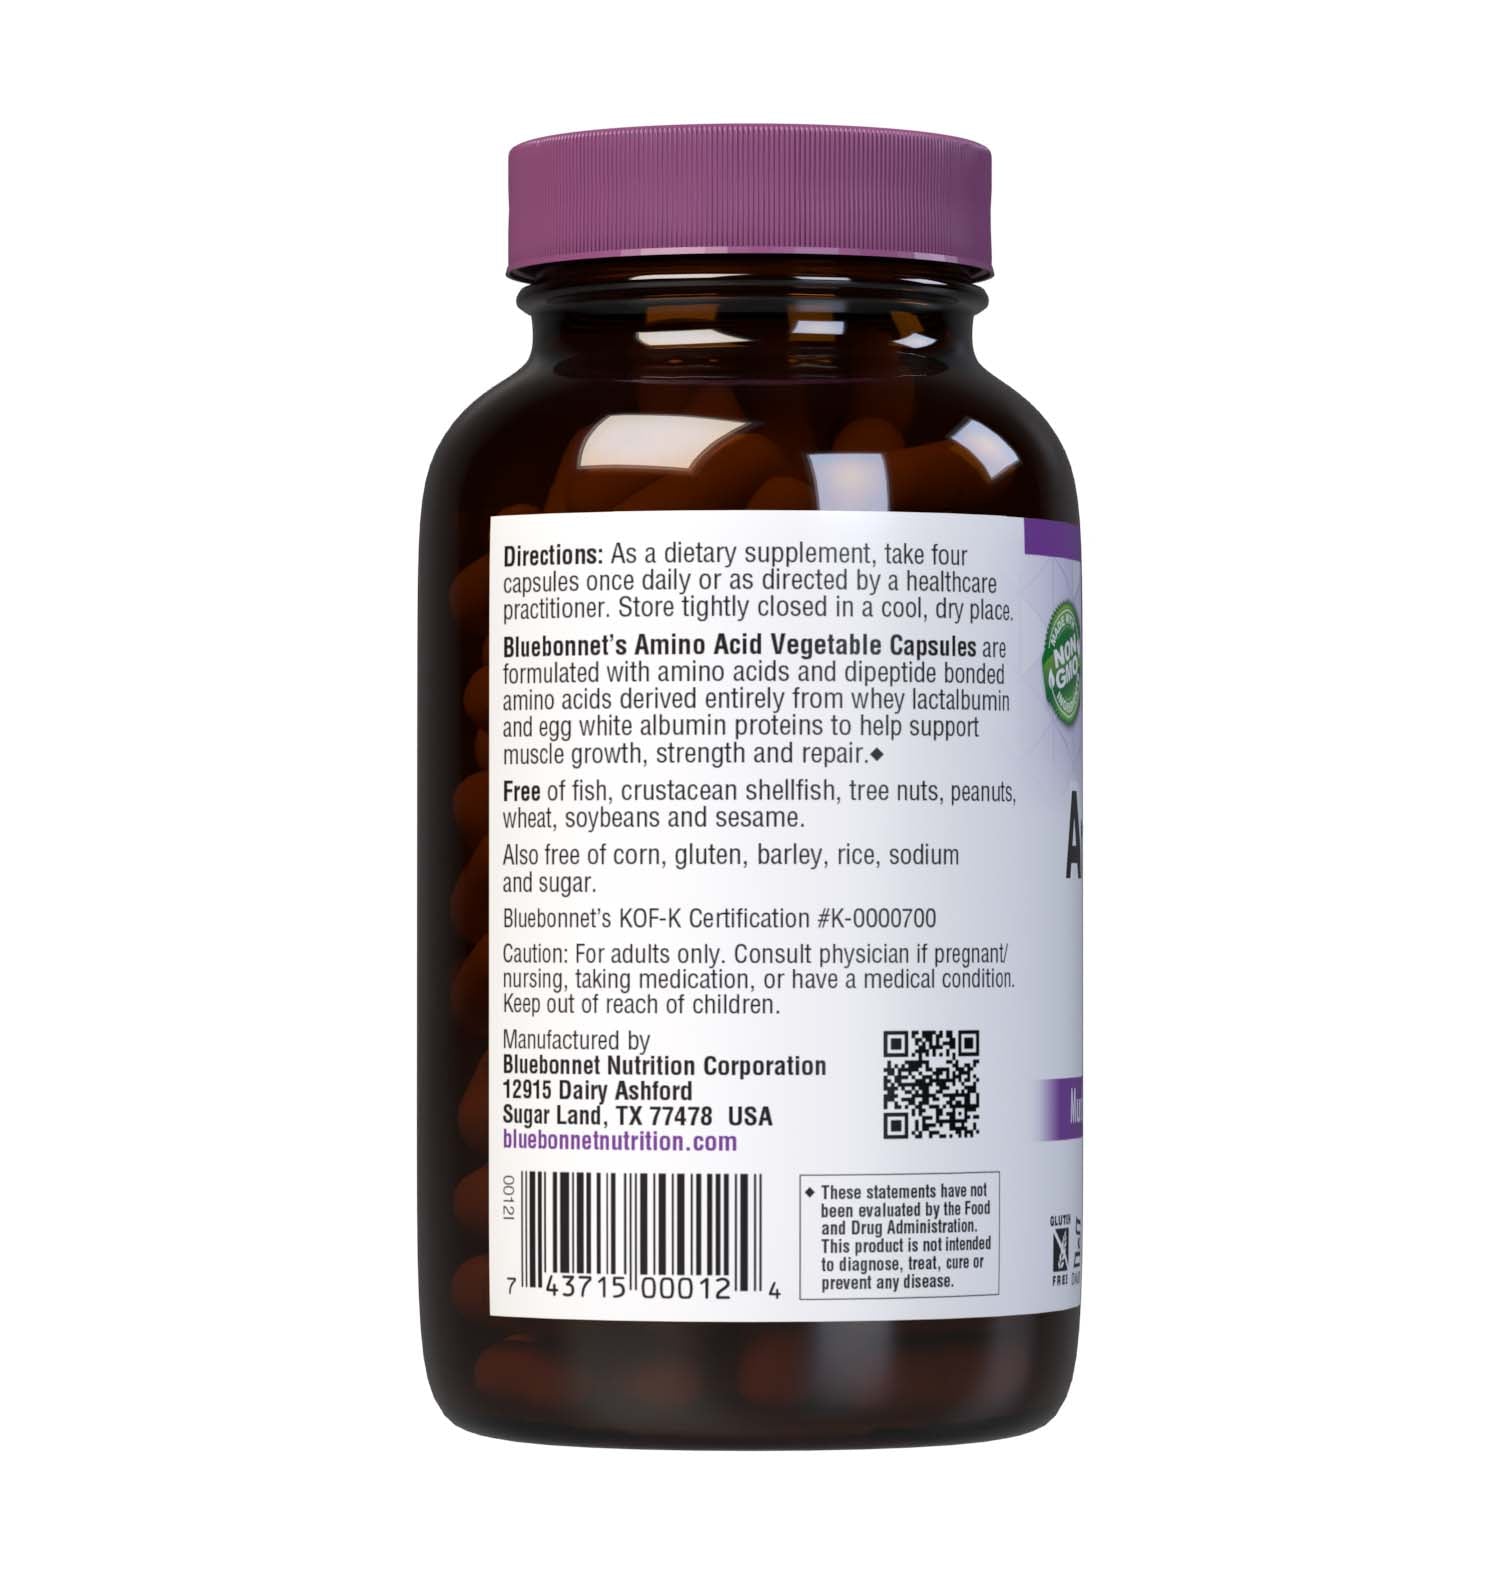 Bluebonnet's Amino Acid 120 Vegetable Capsules contain amino acidsand dipeptide bonded amino acids derived entirely from whey lactalbumin and egg white albumin proteins for muscle growth, strength and repair. description panel. #size_120 count